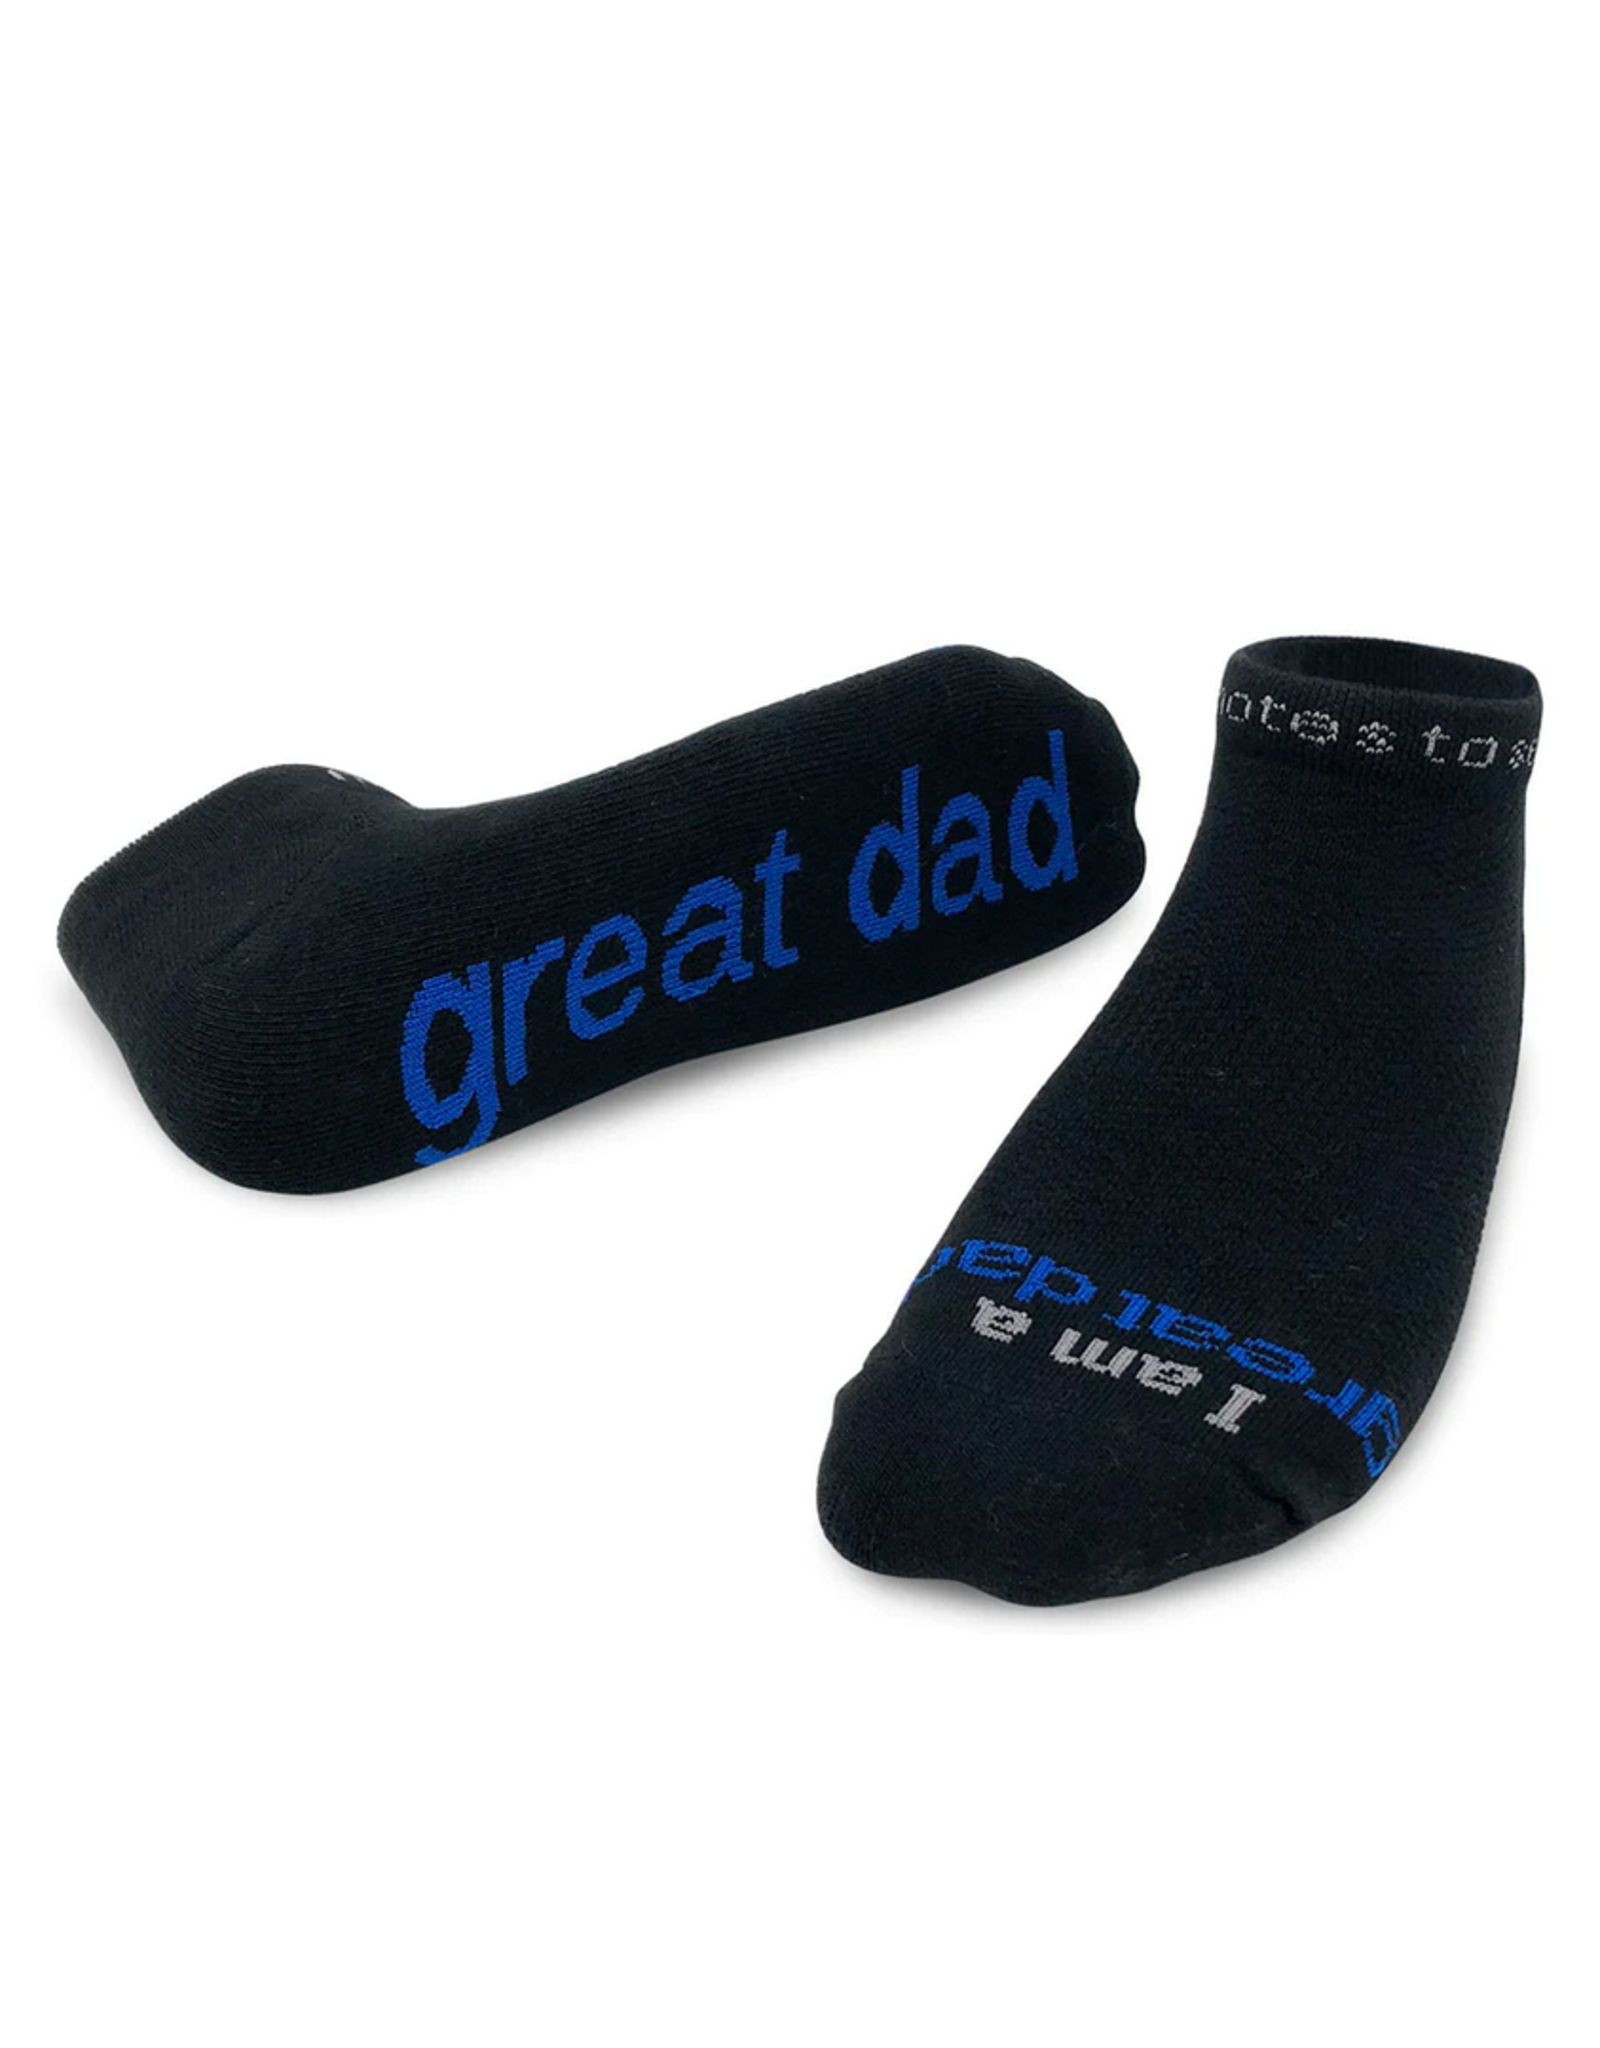 notes to self Notes to Self GREAT DAD Low-Cut Socks